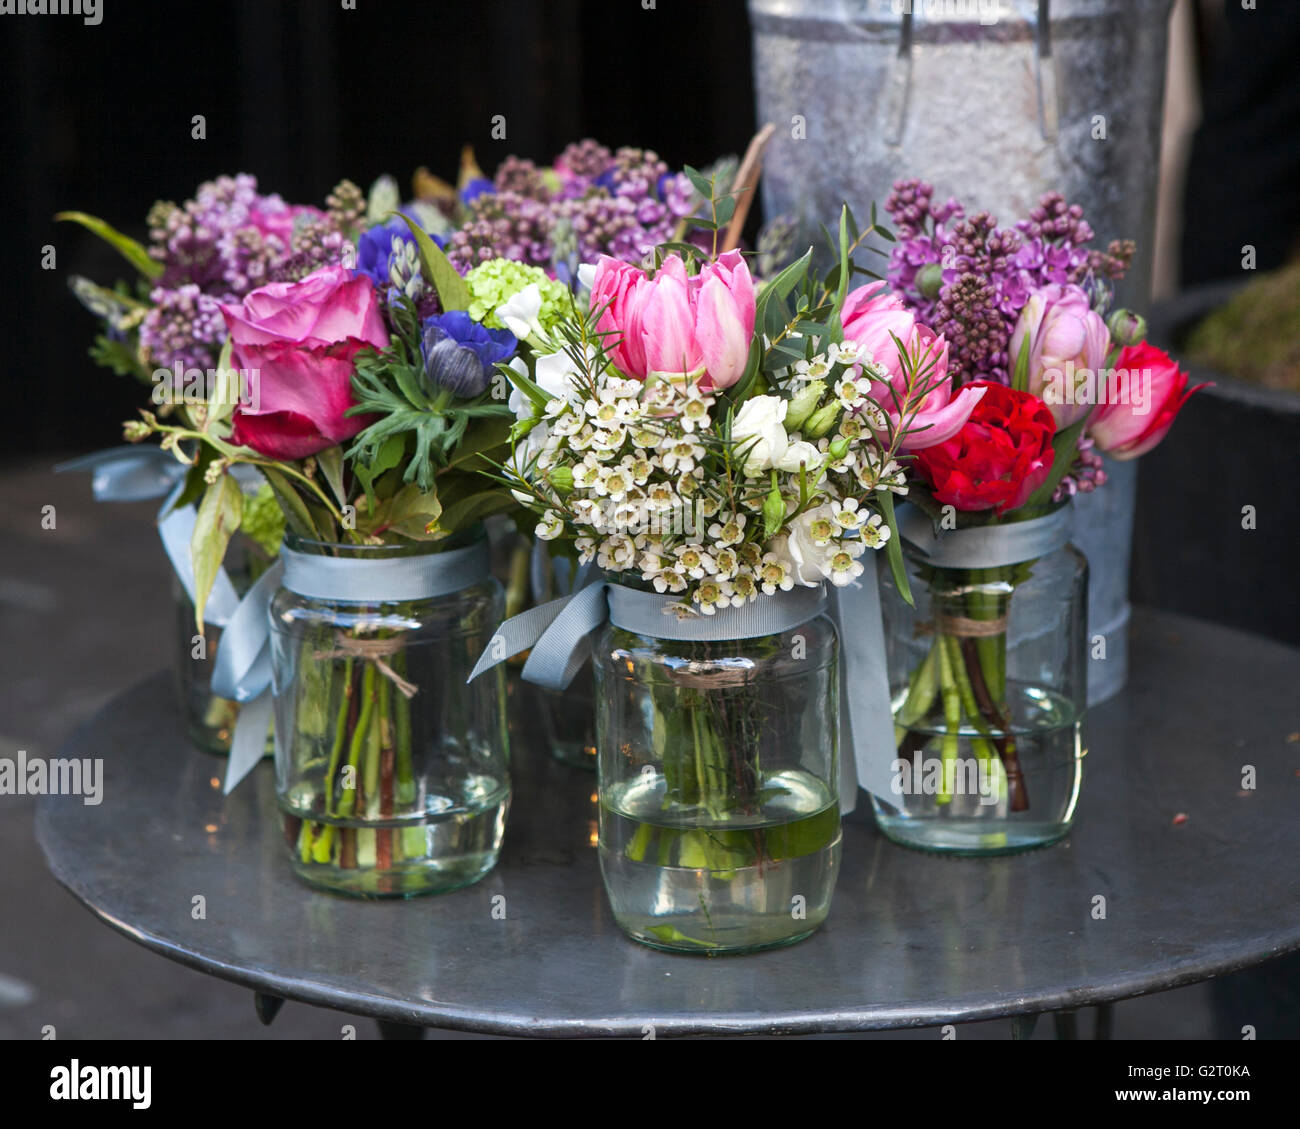 Small bouquets of lilacs, hyacinths, anemones, roses and peonies in small glass jars on an iron table. Stock Photo